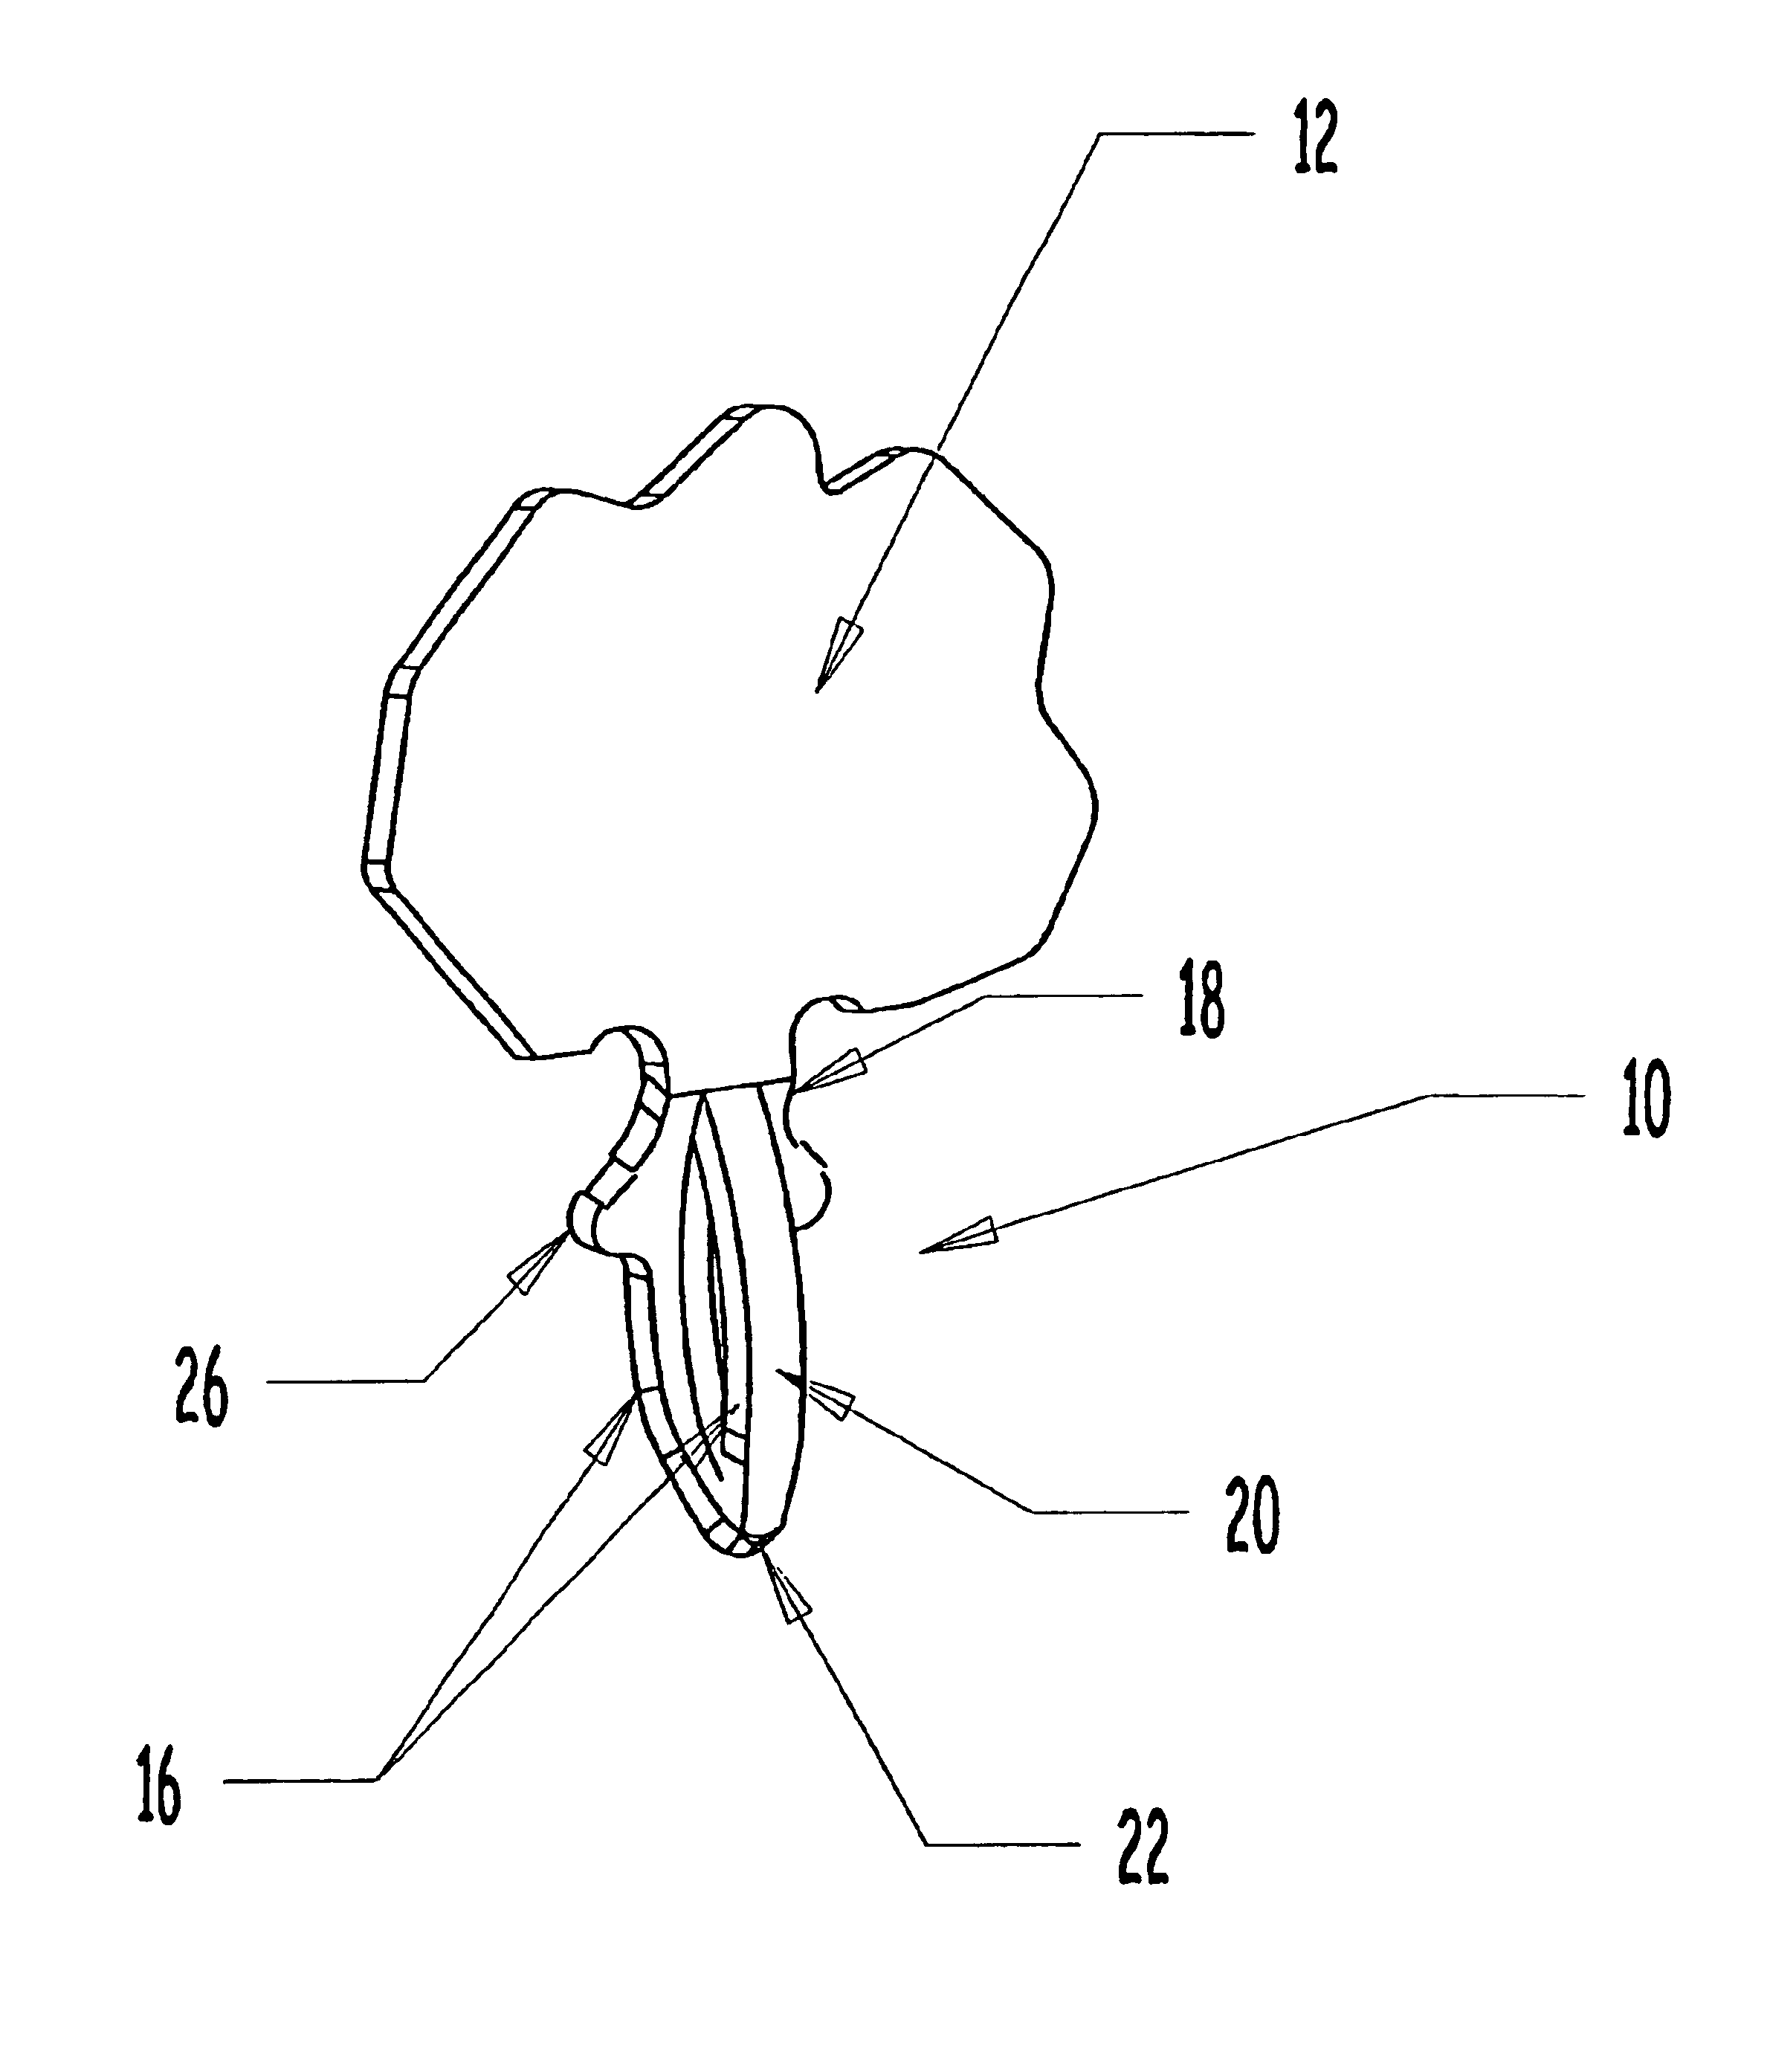 Self-centering press-fit connector pin used to secure components to a receiving element